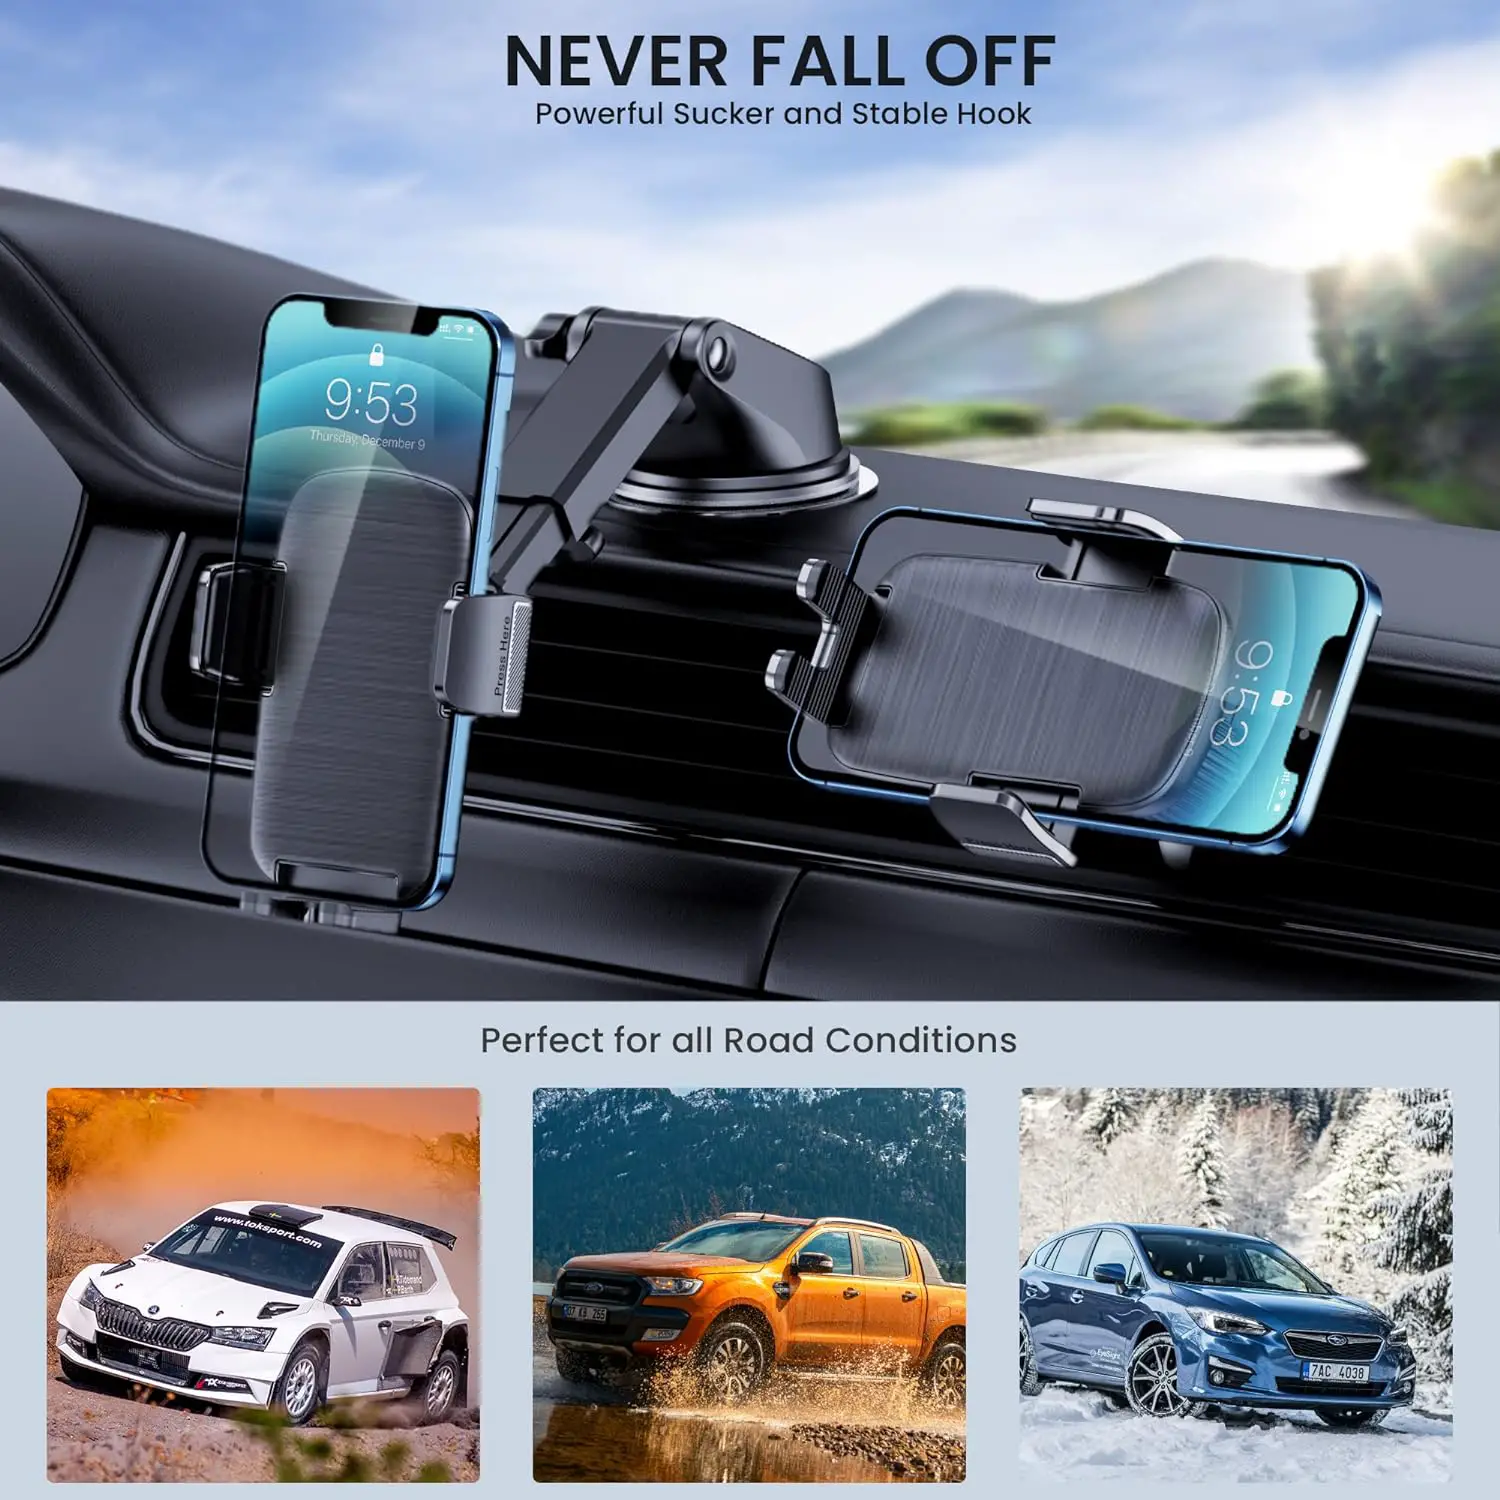 Phone Mount for Car Phone Holder [Military-Grade Suction  Stable Clip]Car Phone Holder Mount Windshield Dashboard Air Vent Universal Cell Phone Automobile Mount Fit For All iPhone Android Smartphones